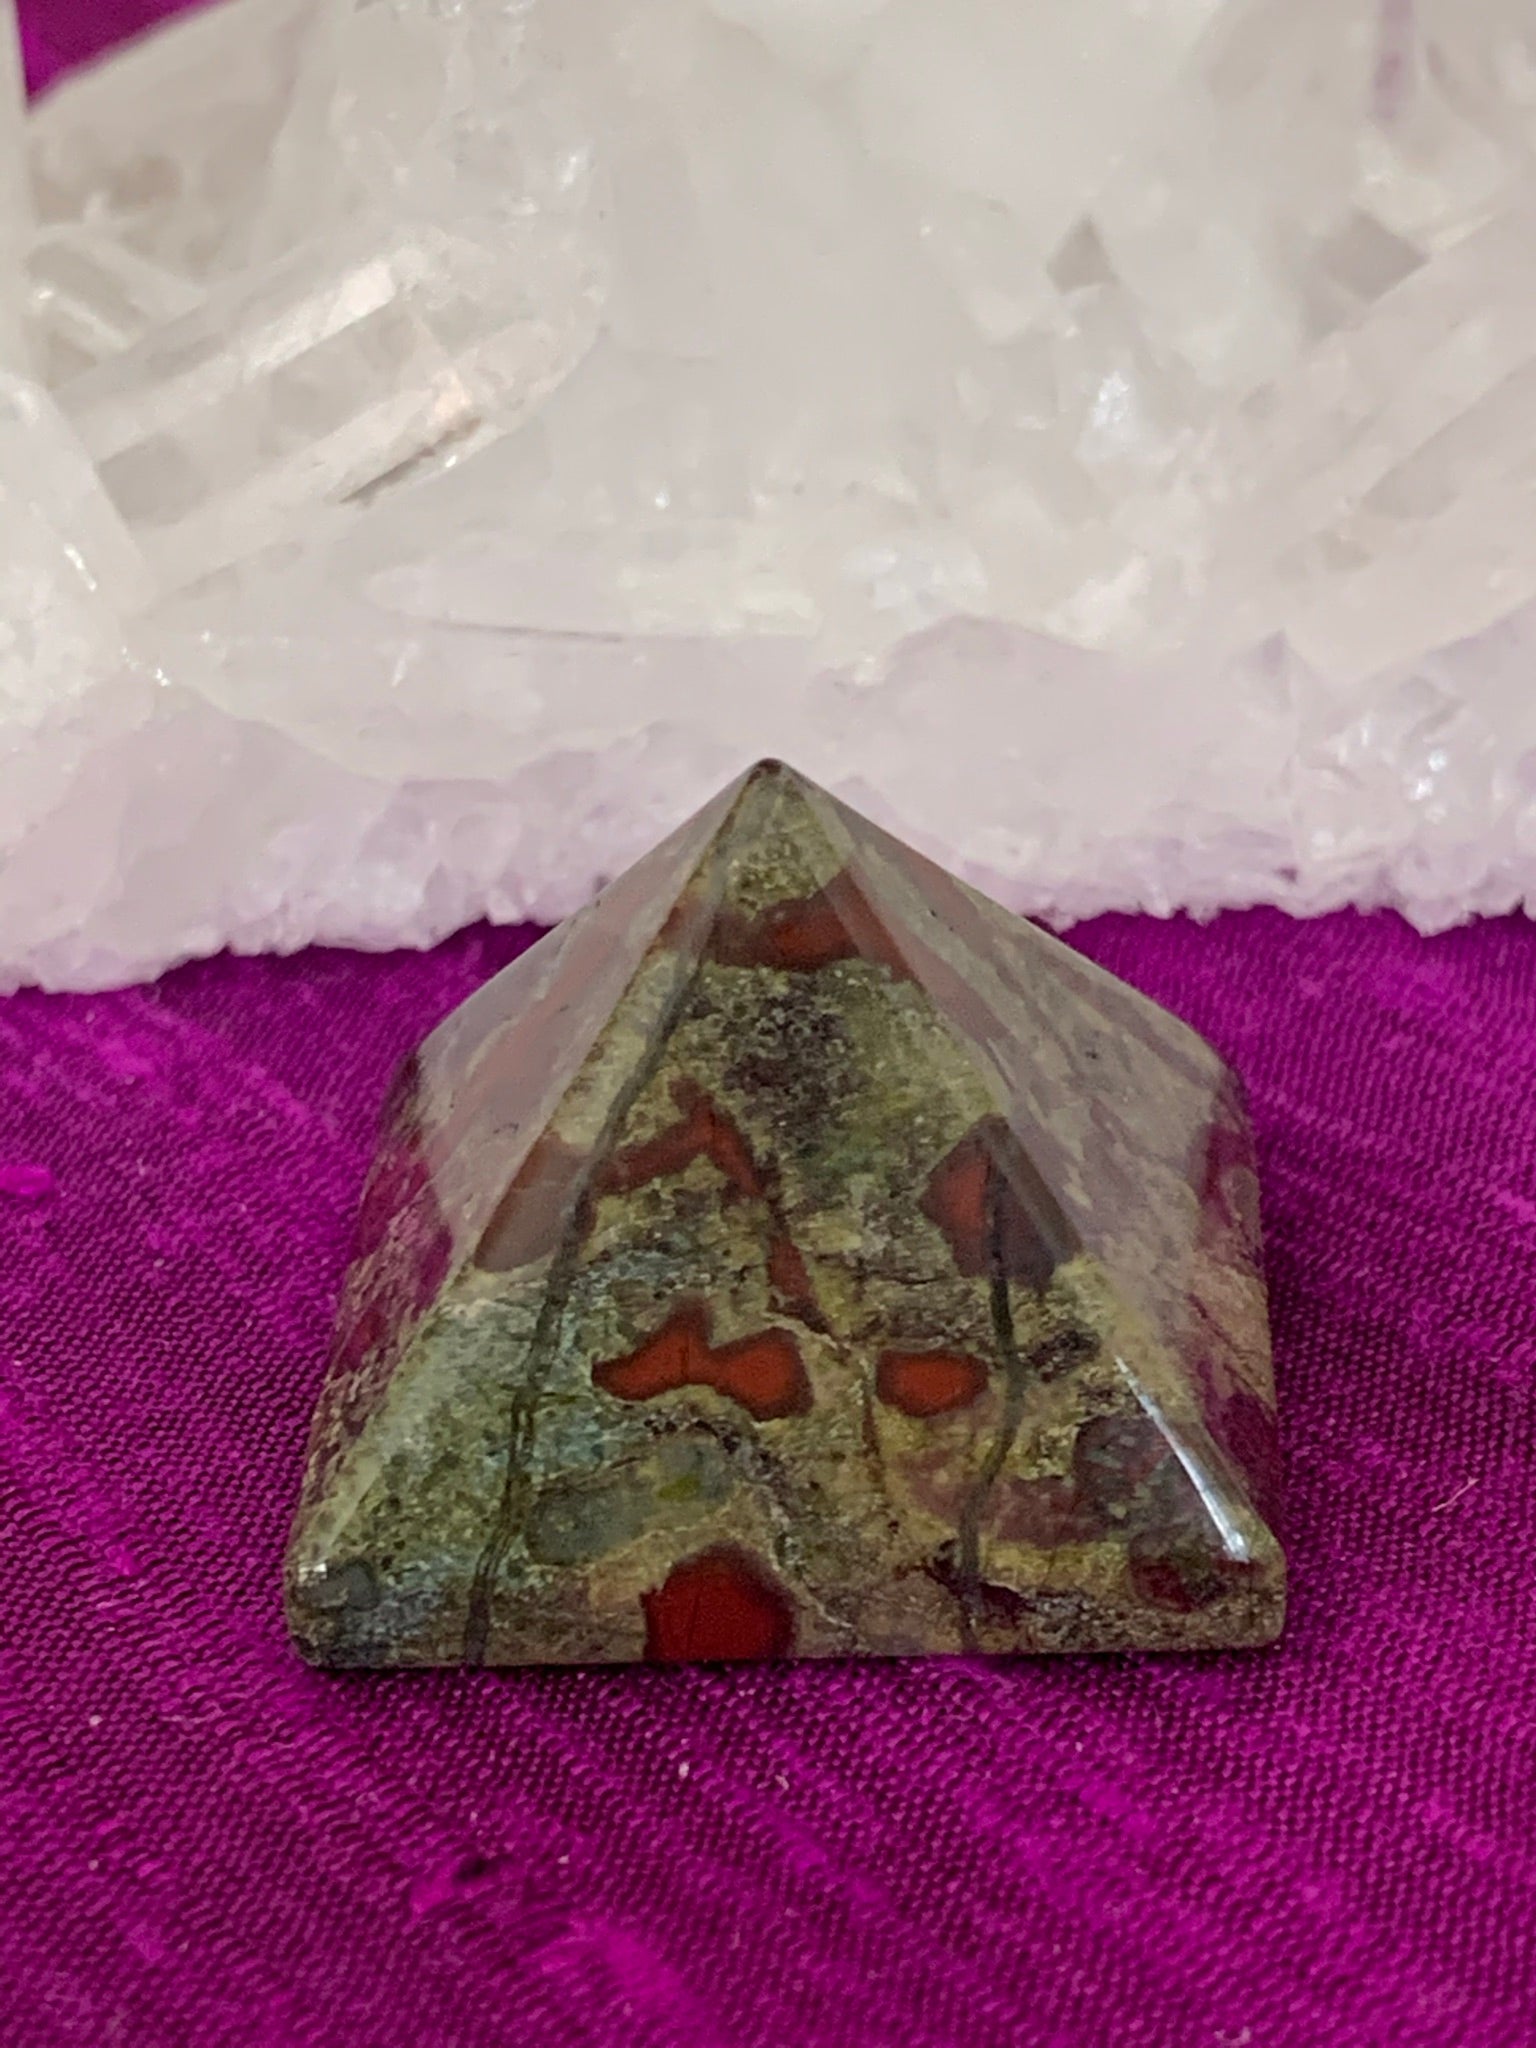 Close-up view . Powerful dragon blood (aka dragon stone) pyramid is perfect for your altar, meditation space or anywhere you want to radiate the energy of courage. Dragon stone jasper (a variety of quartz) is a stone of strength, courage and personal power. It enhances creativity and also attracts both money and love (themagicisinyou.com). It is also said to increase fertility. Size is approximately1"x1".